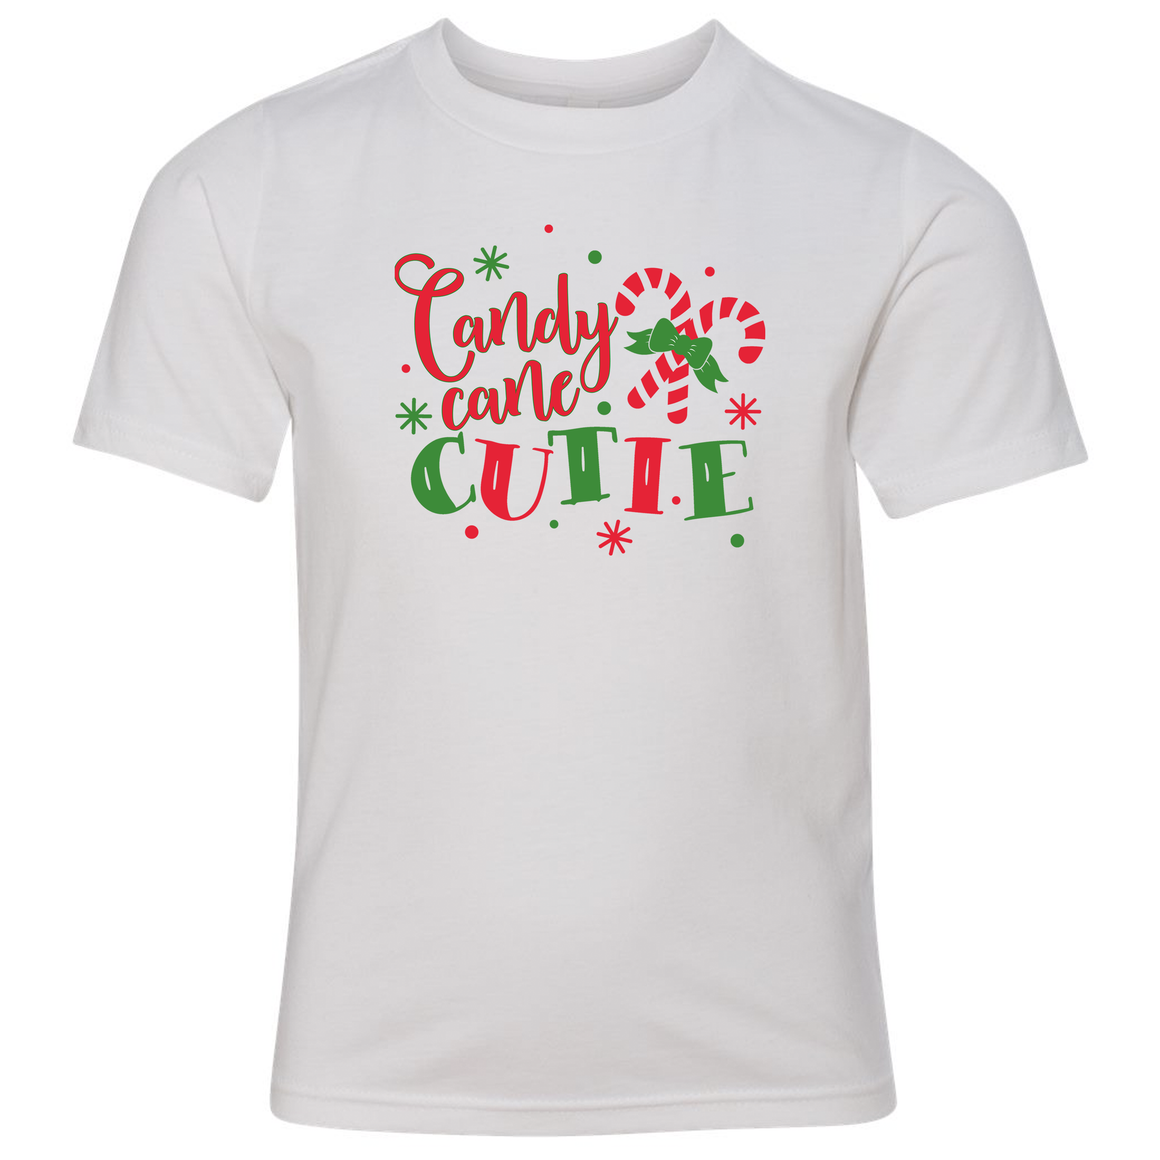 Candy Cane Cutie Short Sleeve Tee (Toddler and Youth)